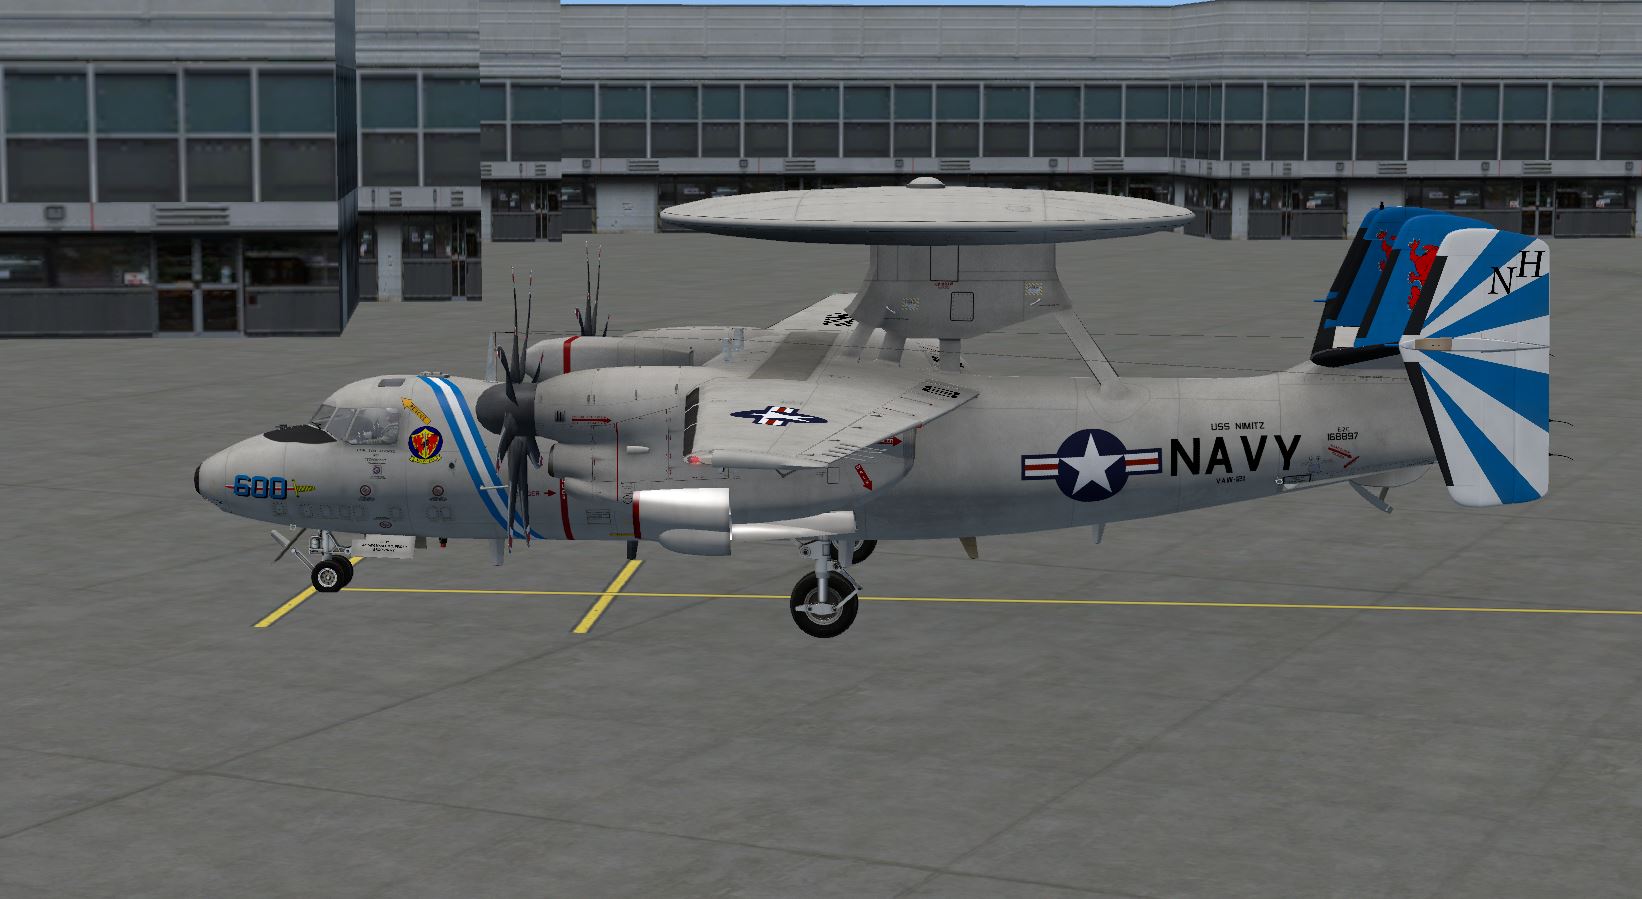 E2 Hawkeye with rotating Radar Dome, and an AEW system that you can't hide from, multiplayer, AI, etc. It will detect it. FSX, FSX-SE, and all versions of P3D TESTED! Also a new EFB, Electronic Flight Bag for direct NAV/GPS Flight routes with a click of a button, no more CDU/FMC to program, get there, get it done, and land Period. Also this is 100% TAC-PAC and/or Acceleration. Or if you have a Sim Carrier, which we do, you can land on it as the Tail Hook and Launch Bars work. The wings also fold for carrier OPS. This is avalible to members of the VAW-117th through the USN Admiral. Extra Textures designed by 